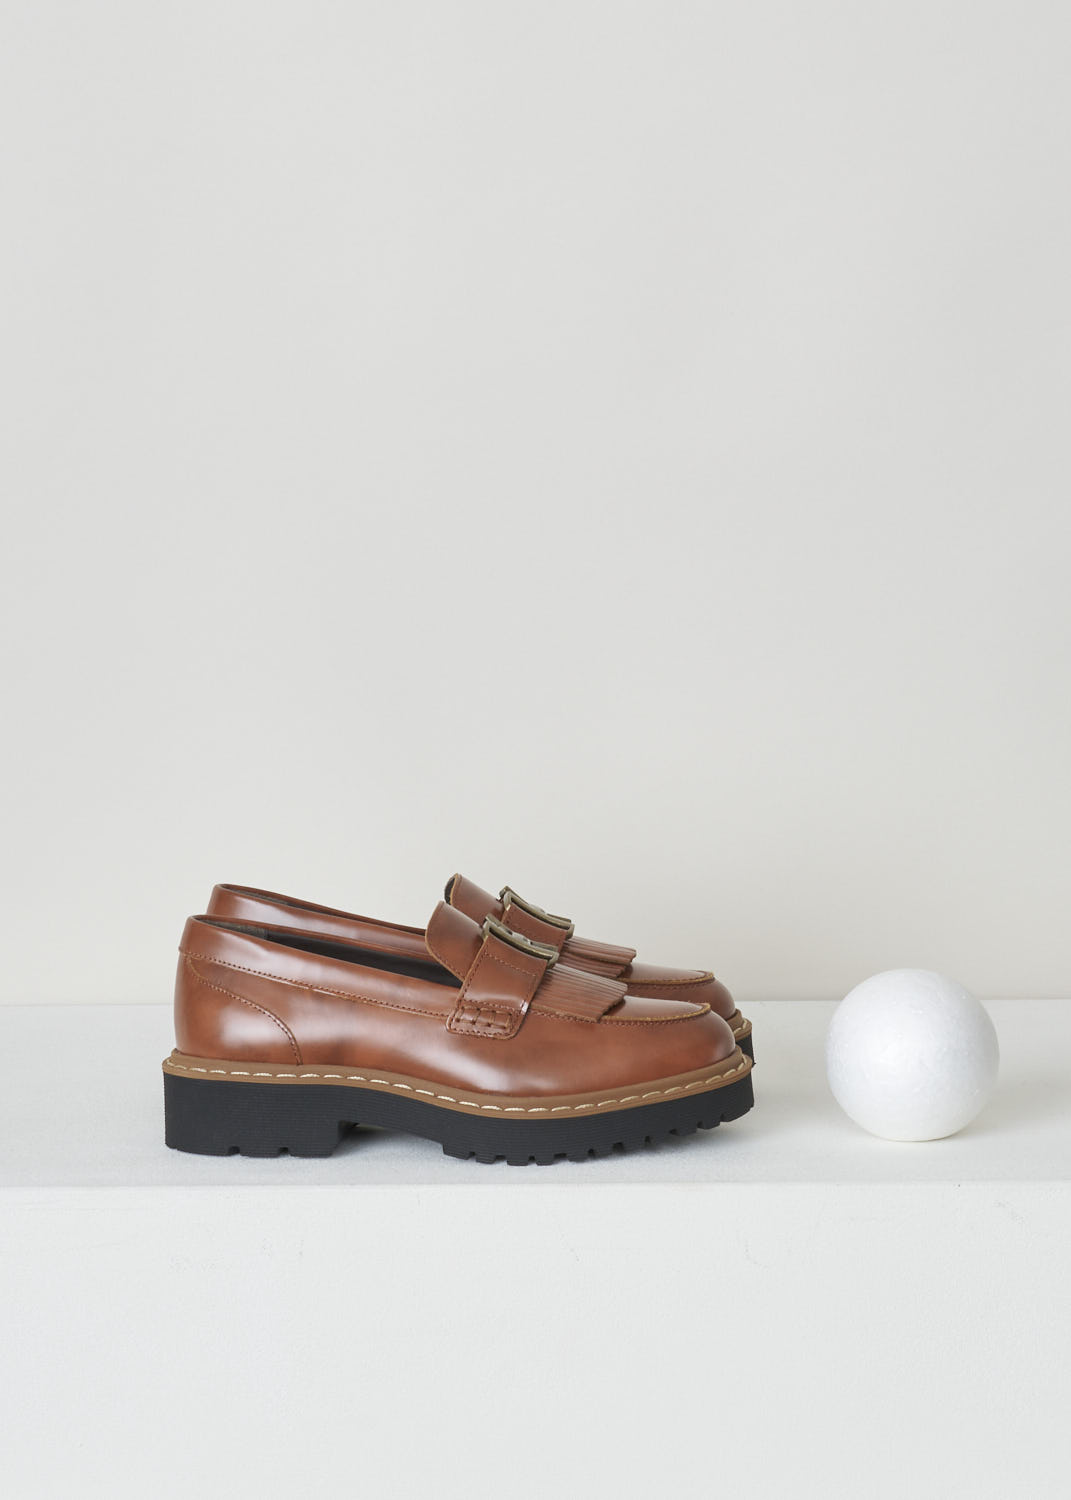 HOGAN, COGNAC MOCASSINS WITH BUCKLE AND TASSELS, HXW5430DH72Q7OS003, Brown, Side,  Cognac colored loafer. These slip-on loafers have a rounded toe with moccasin toe stitching and a H-shaped buckle and tassels over the upper side.

